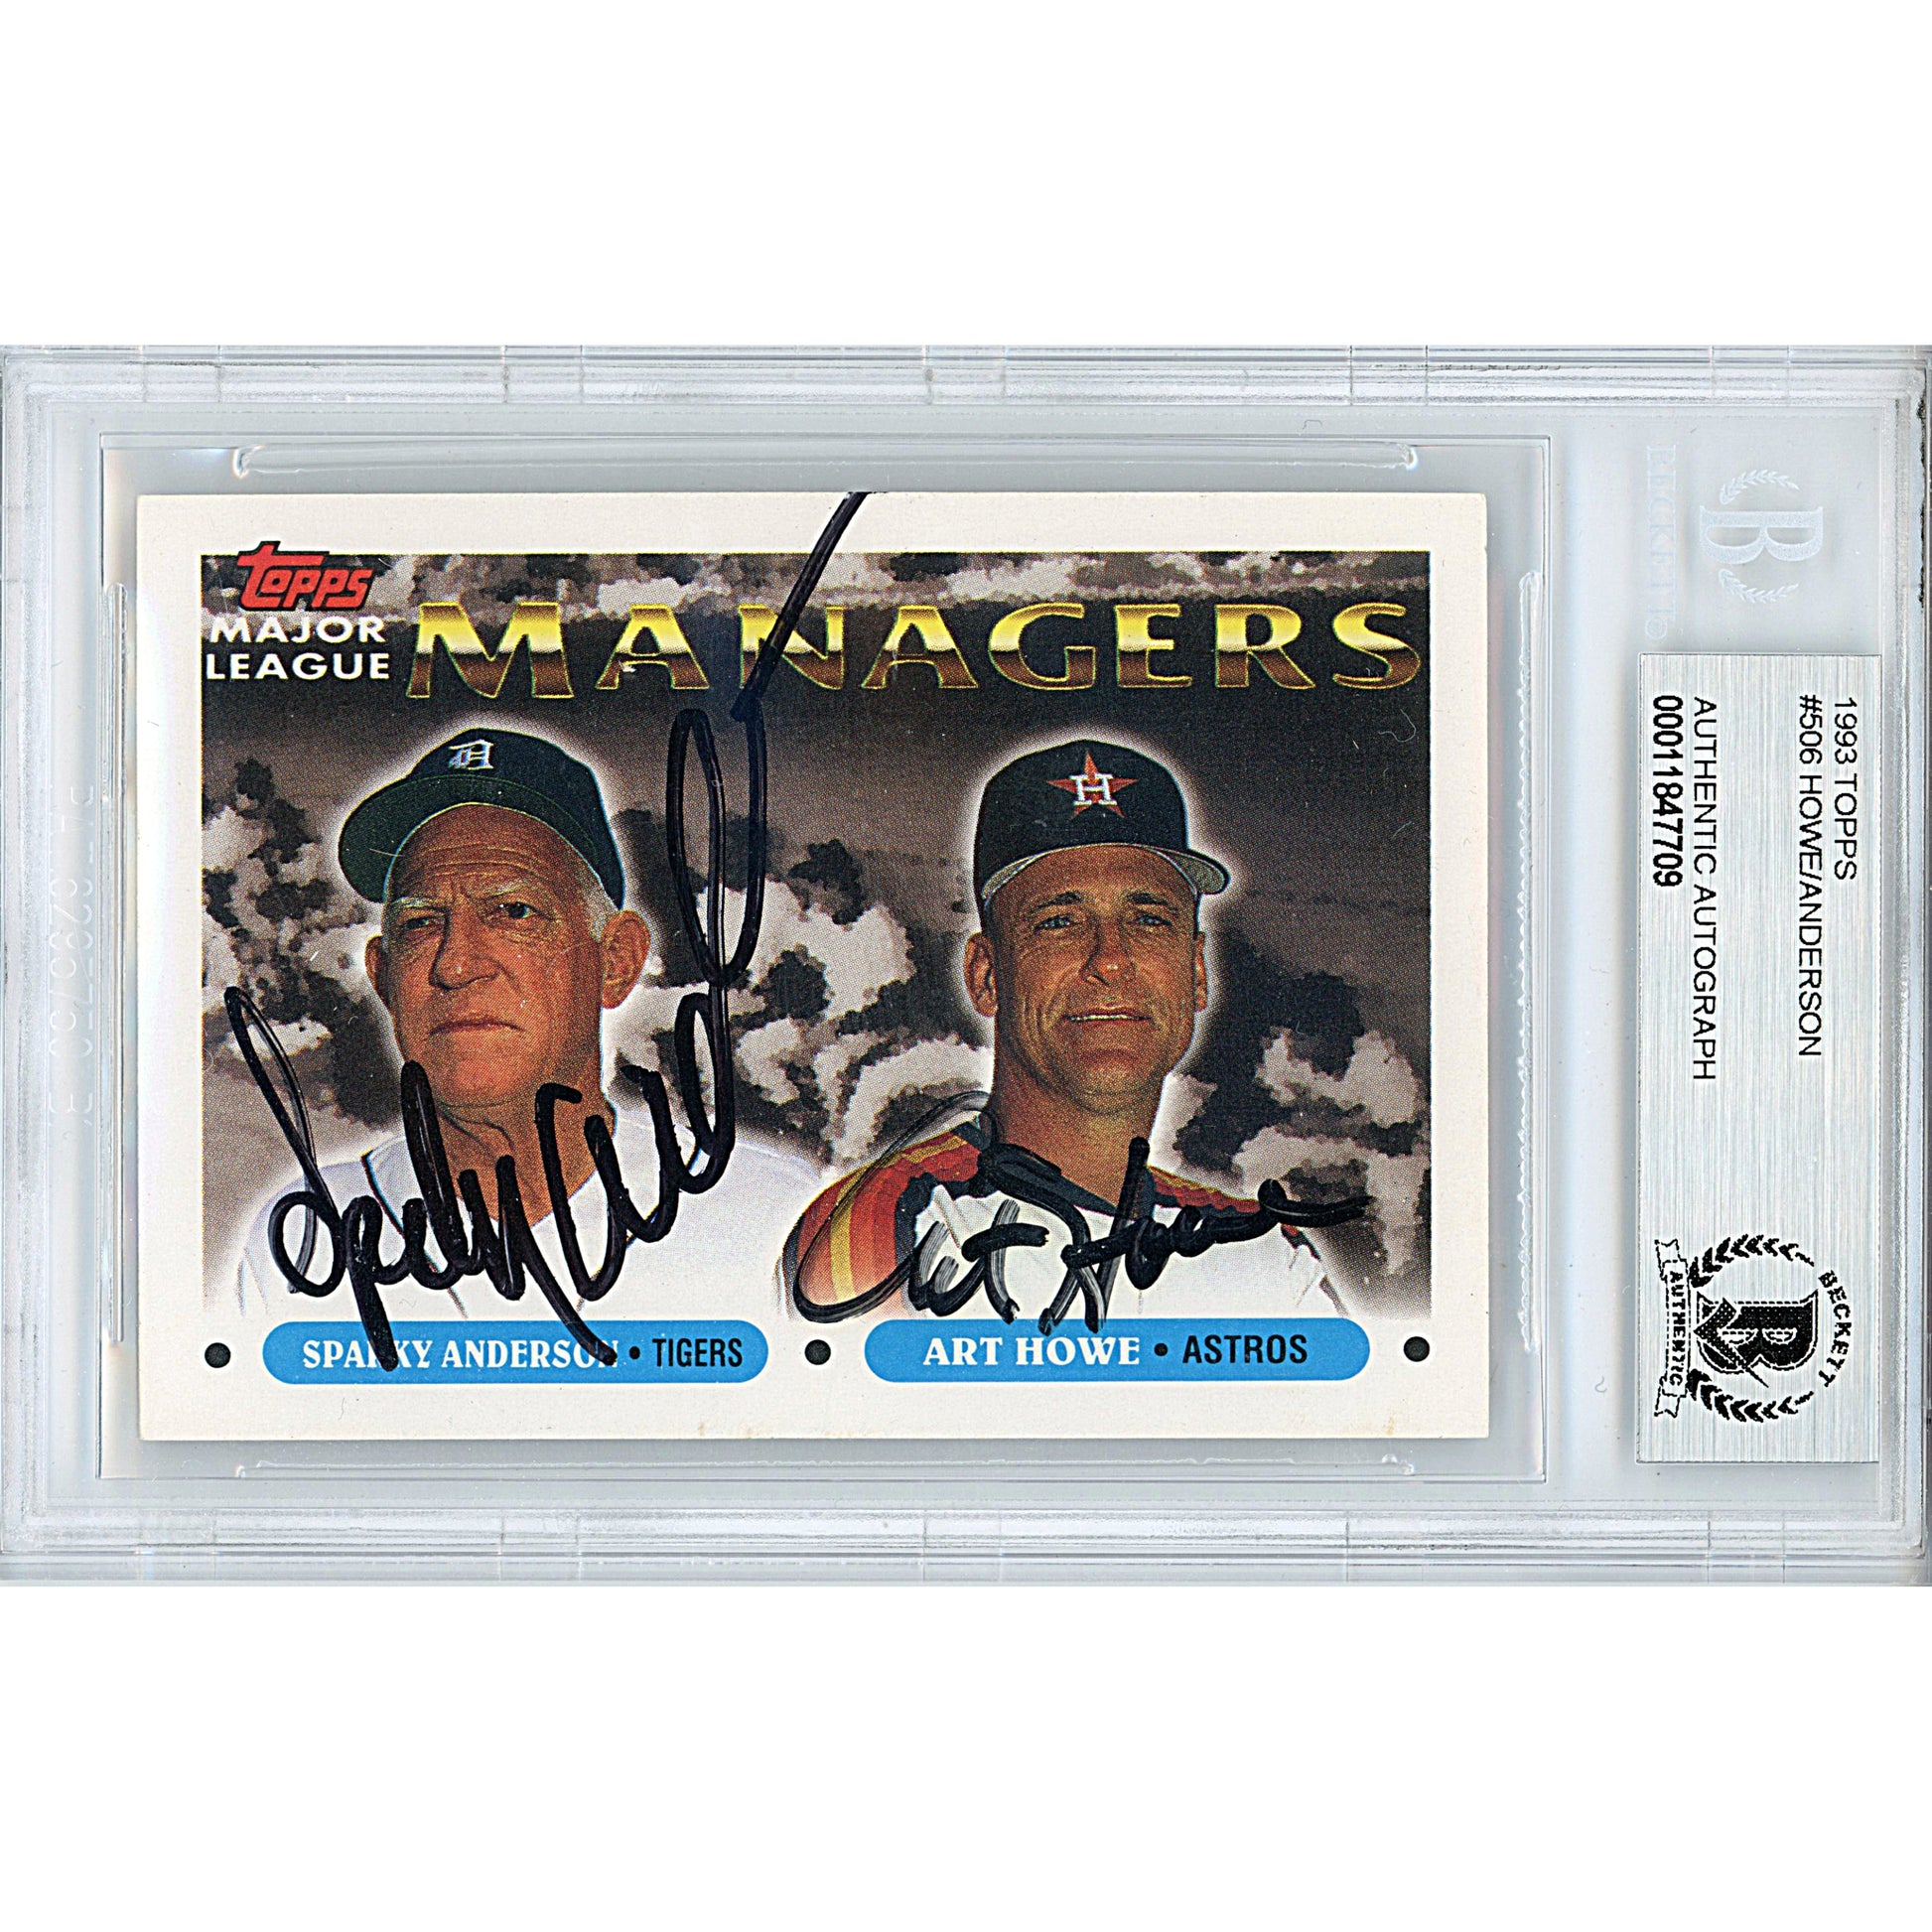 Baseballs- Autographed- Art Howe and Sparky Anderson Signed 1993 Topps Major League Managers Base Set Baseball Trading Card - Houston Astros - Detroit Tigers - Beckett BGS BAS Slabbed - Encapsulated 00011847709 - 101